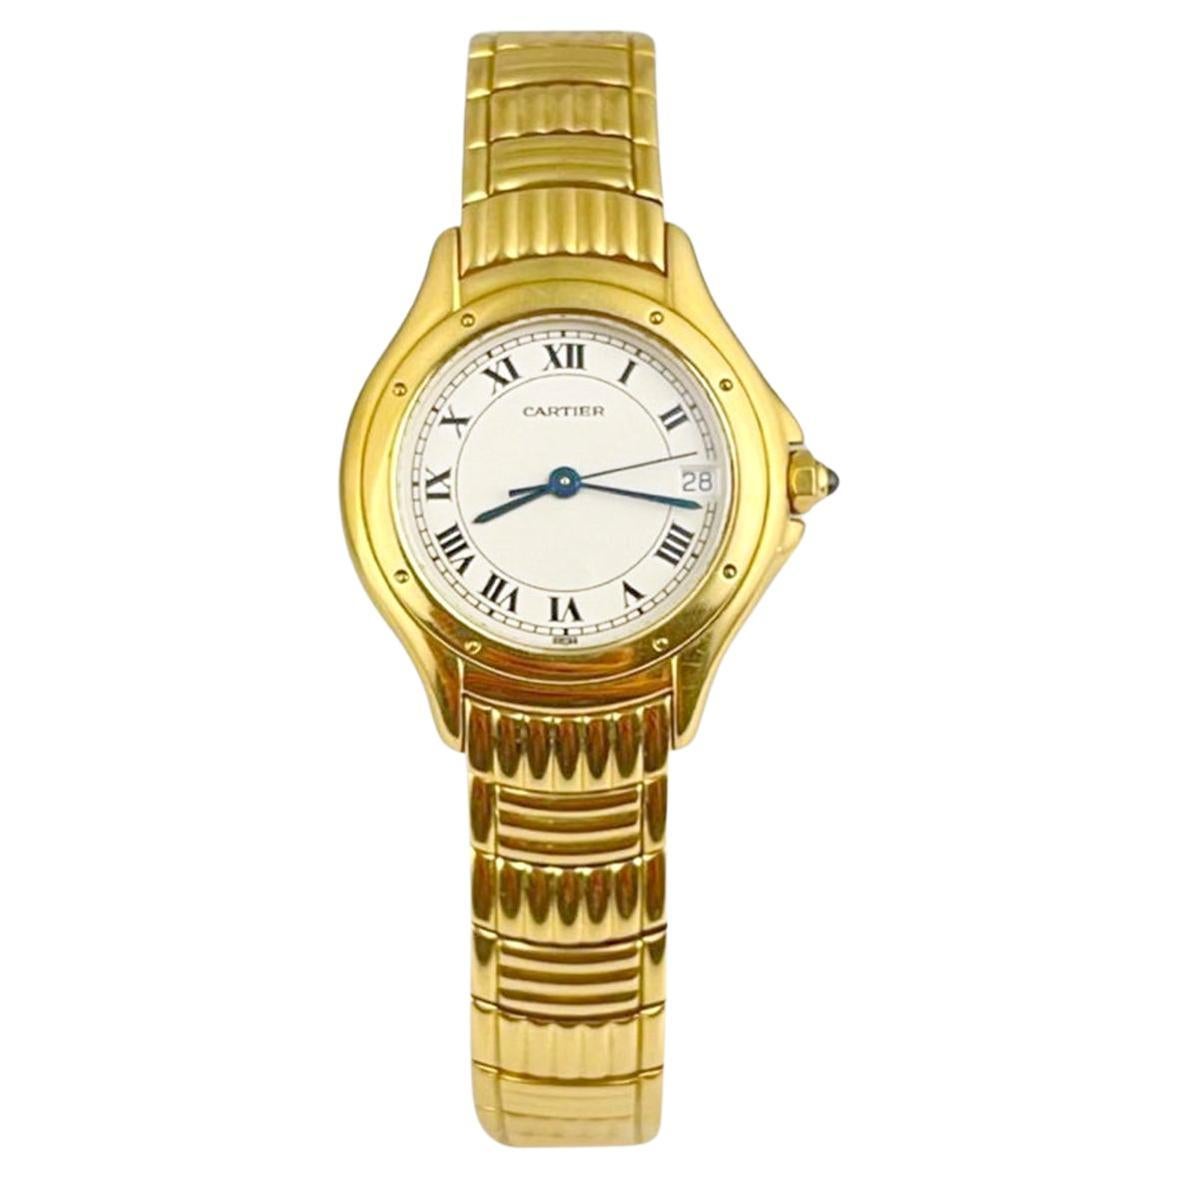 Cartier Cougar Panthere in 18k Yellow Gold Watch